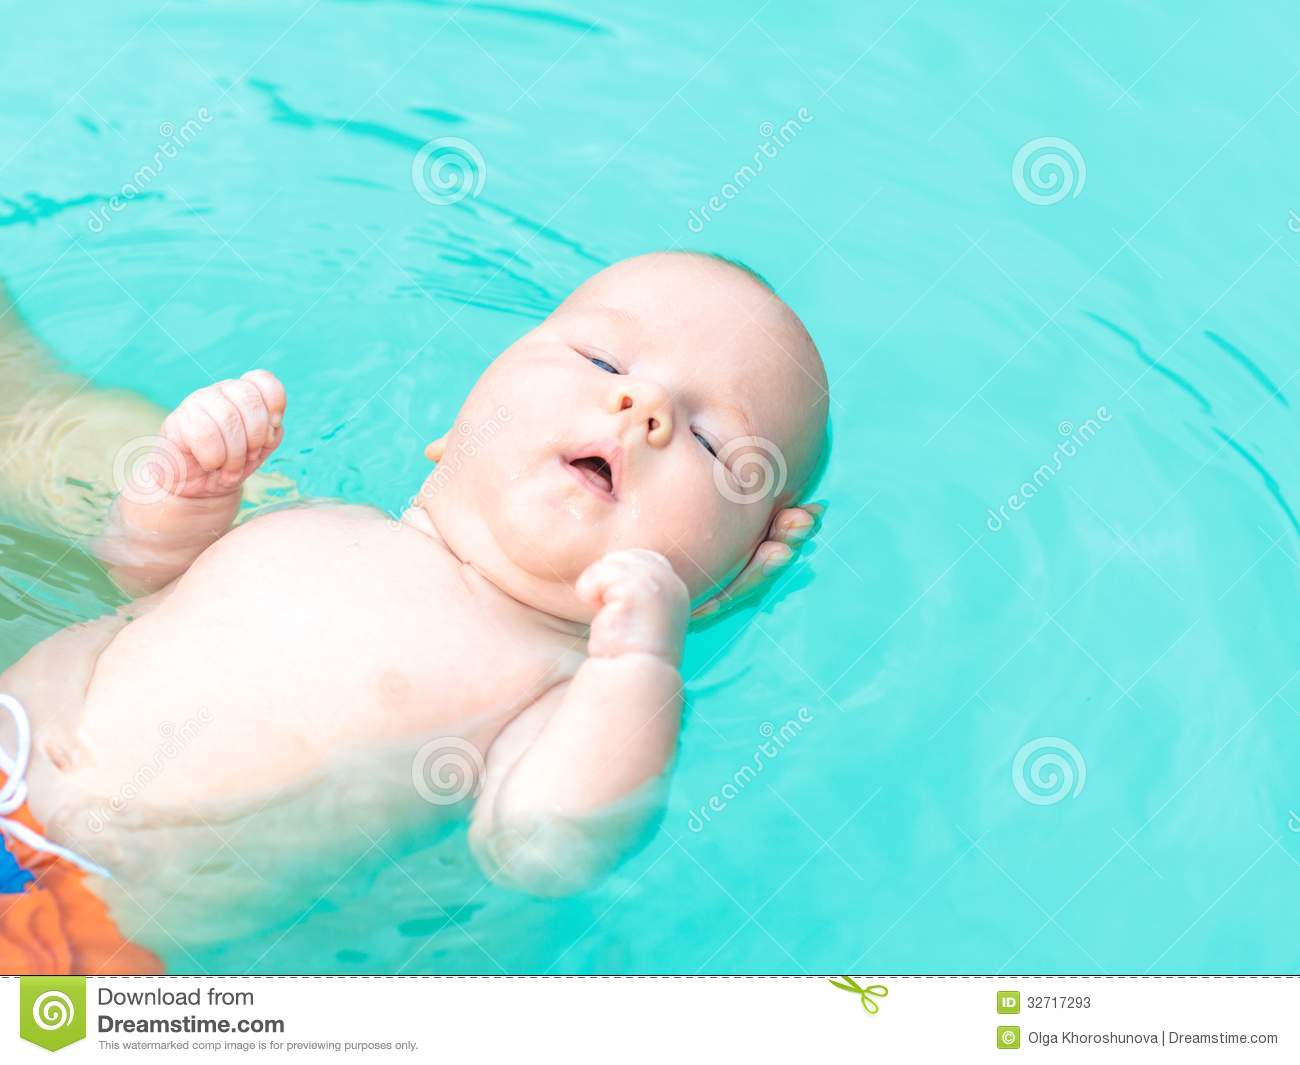 Baby In Pool Stock Photos   Image  32717293